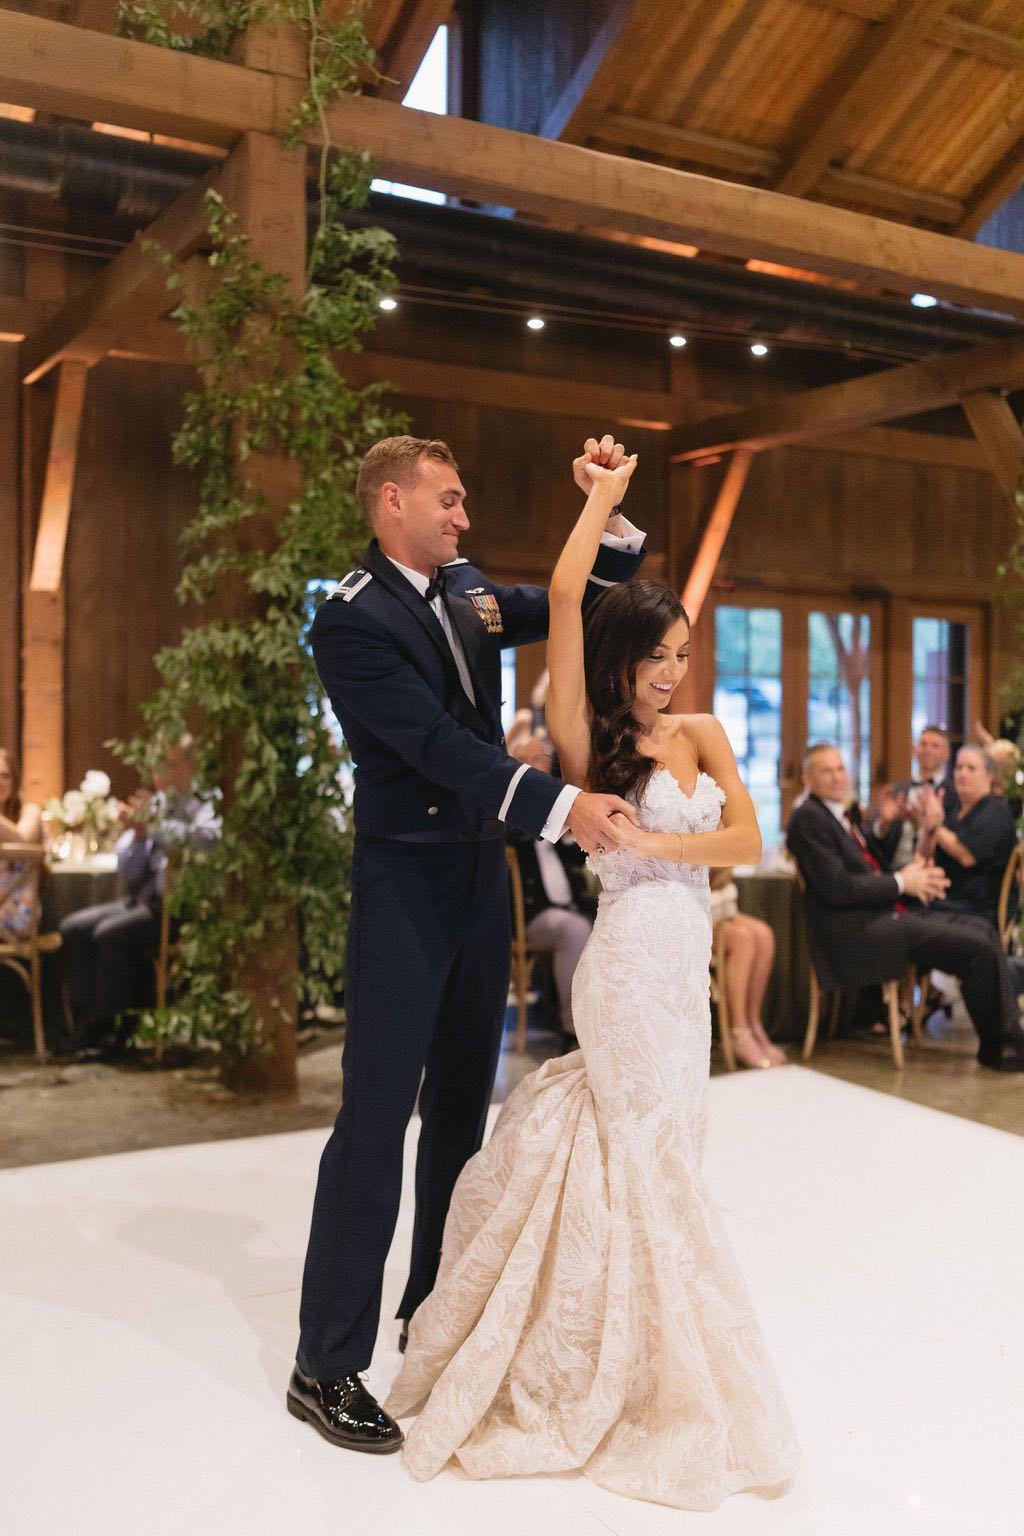 Bride and air force groom sharing their first dance on a white dance floor